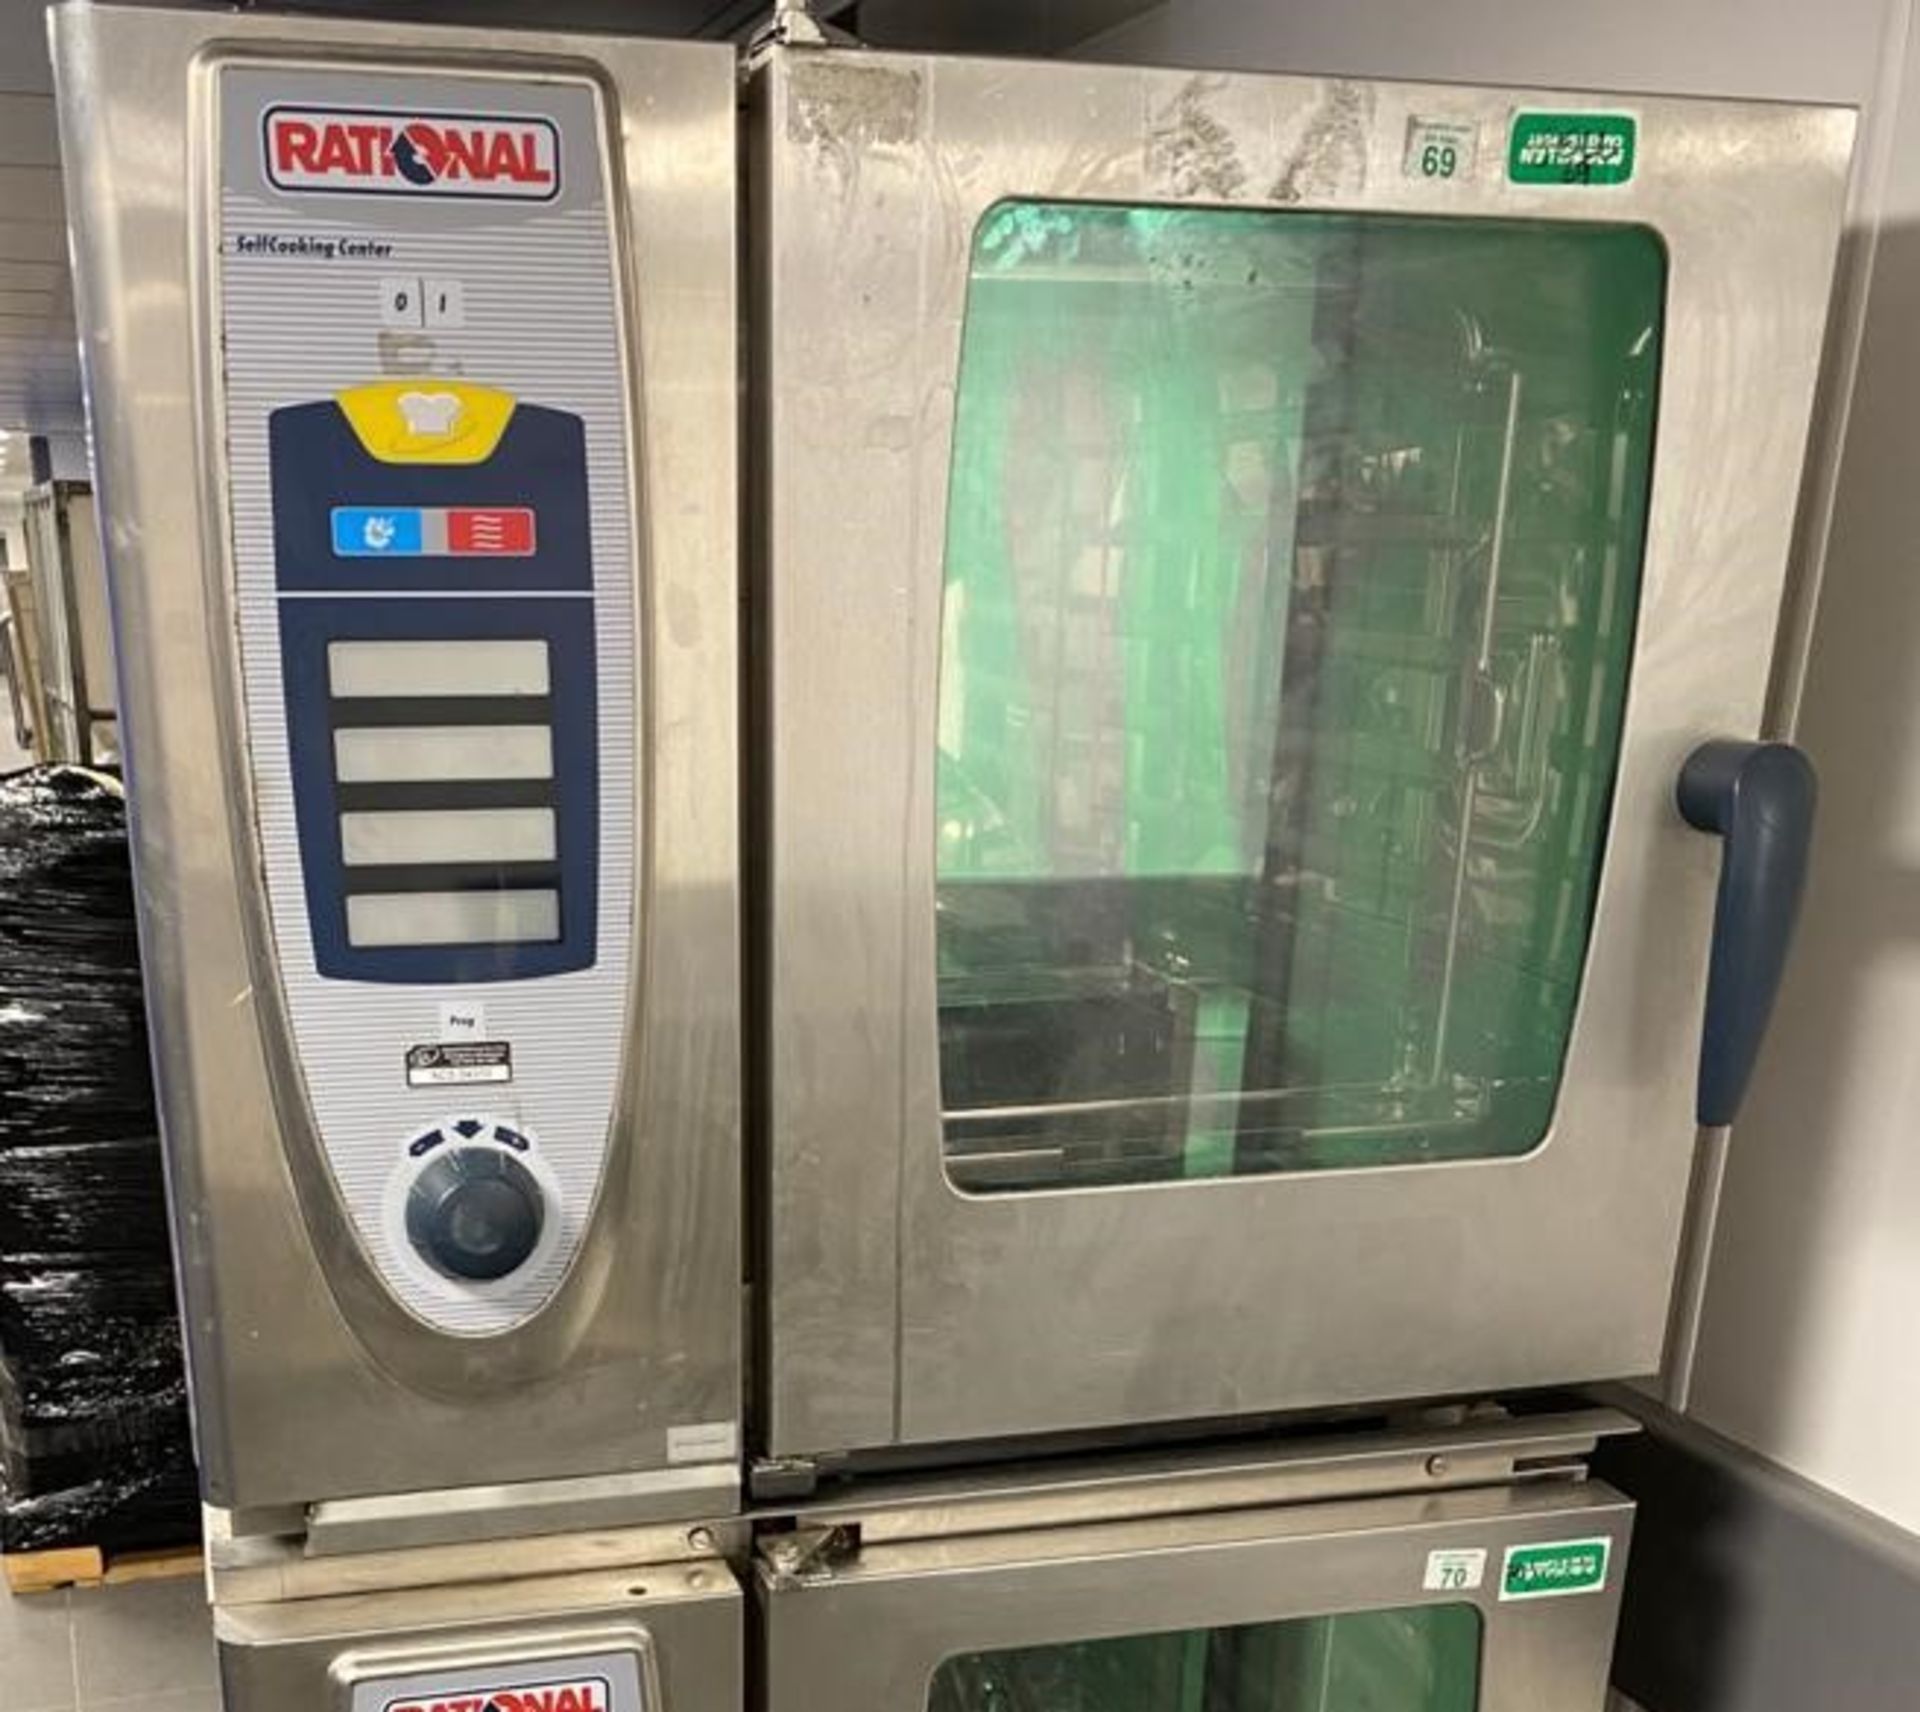 1 x Rational  Grid Electric Combi Oven Care Control - Model SCC101 - Serial Number